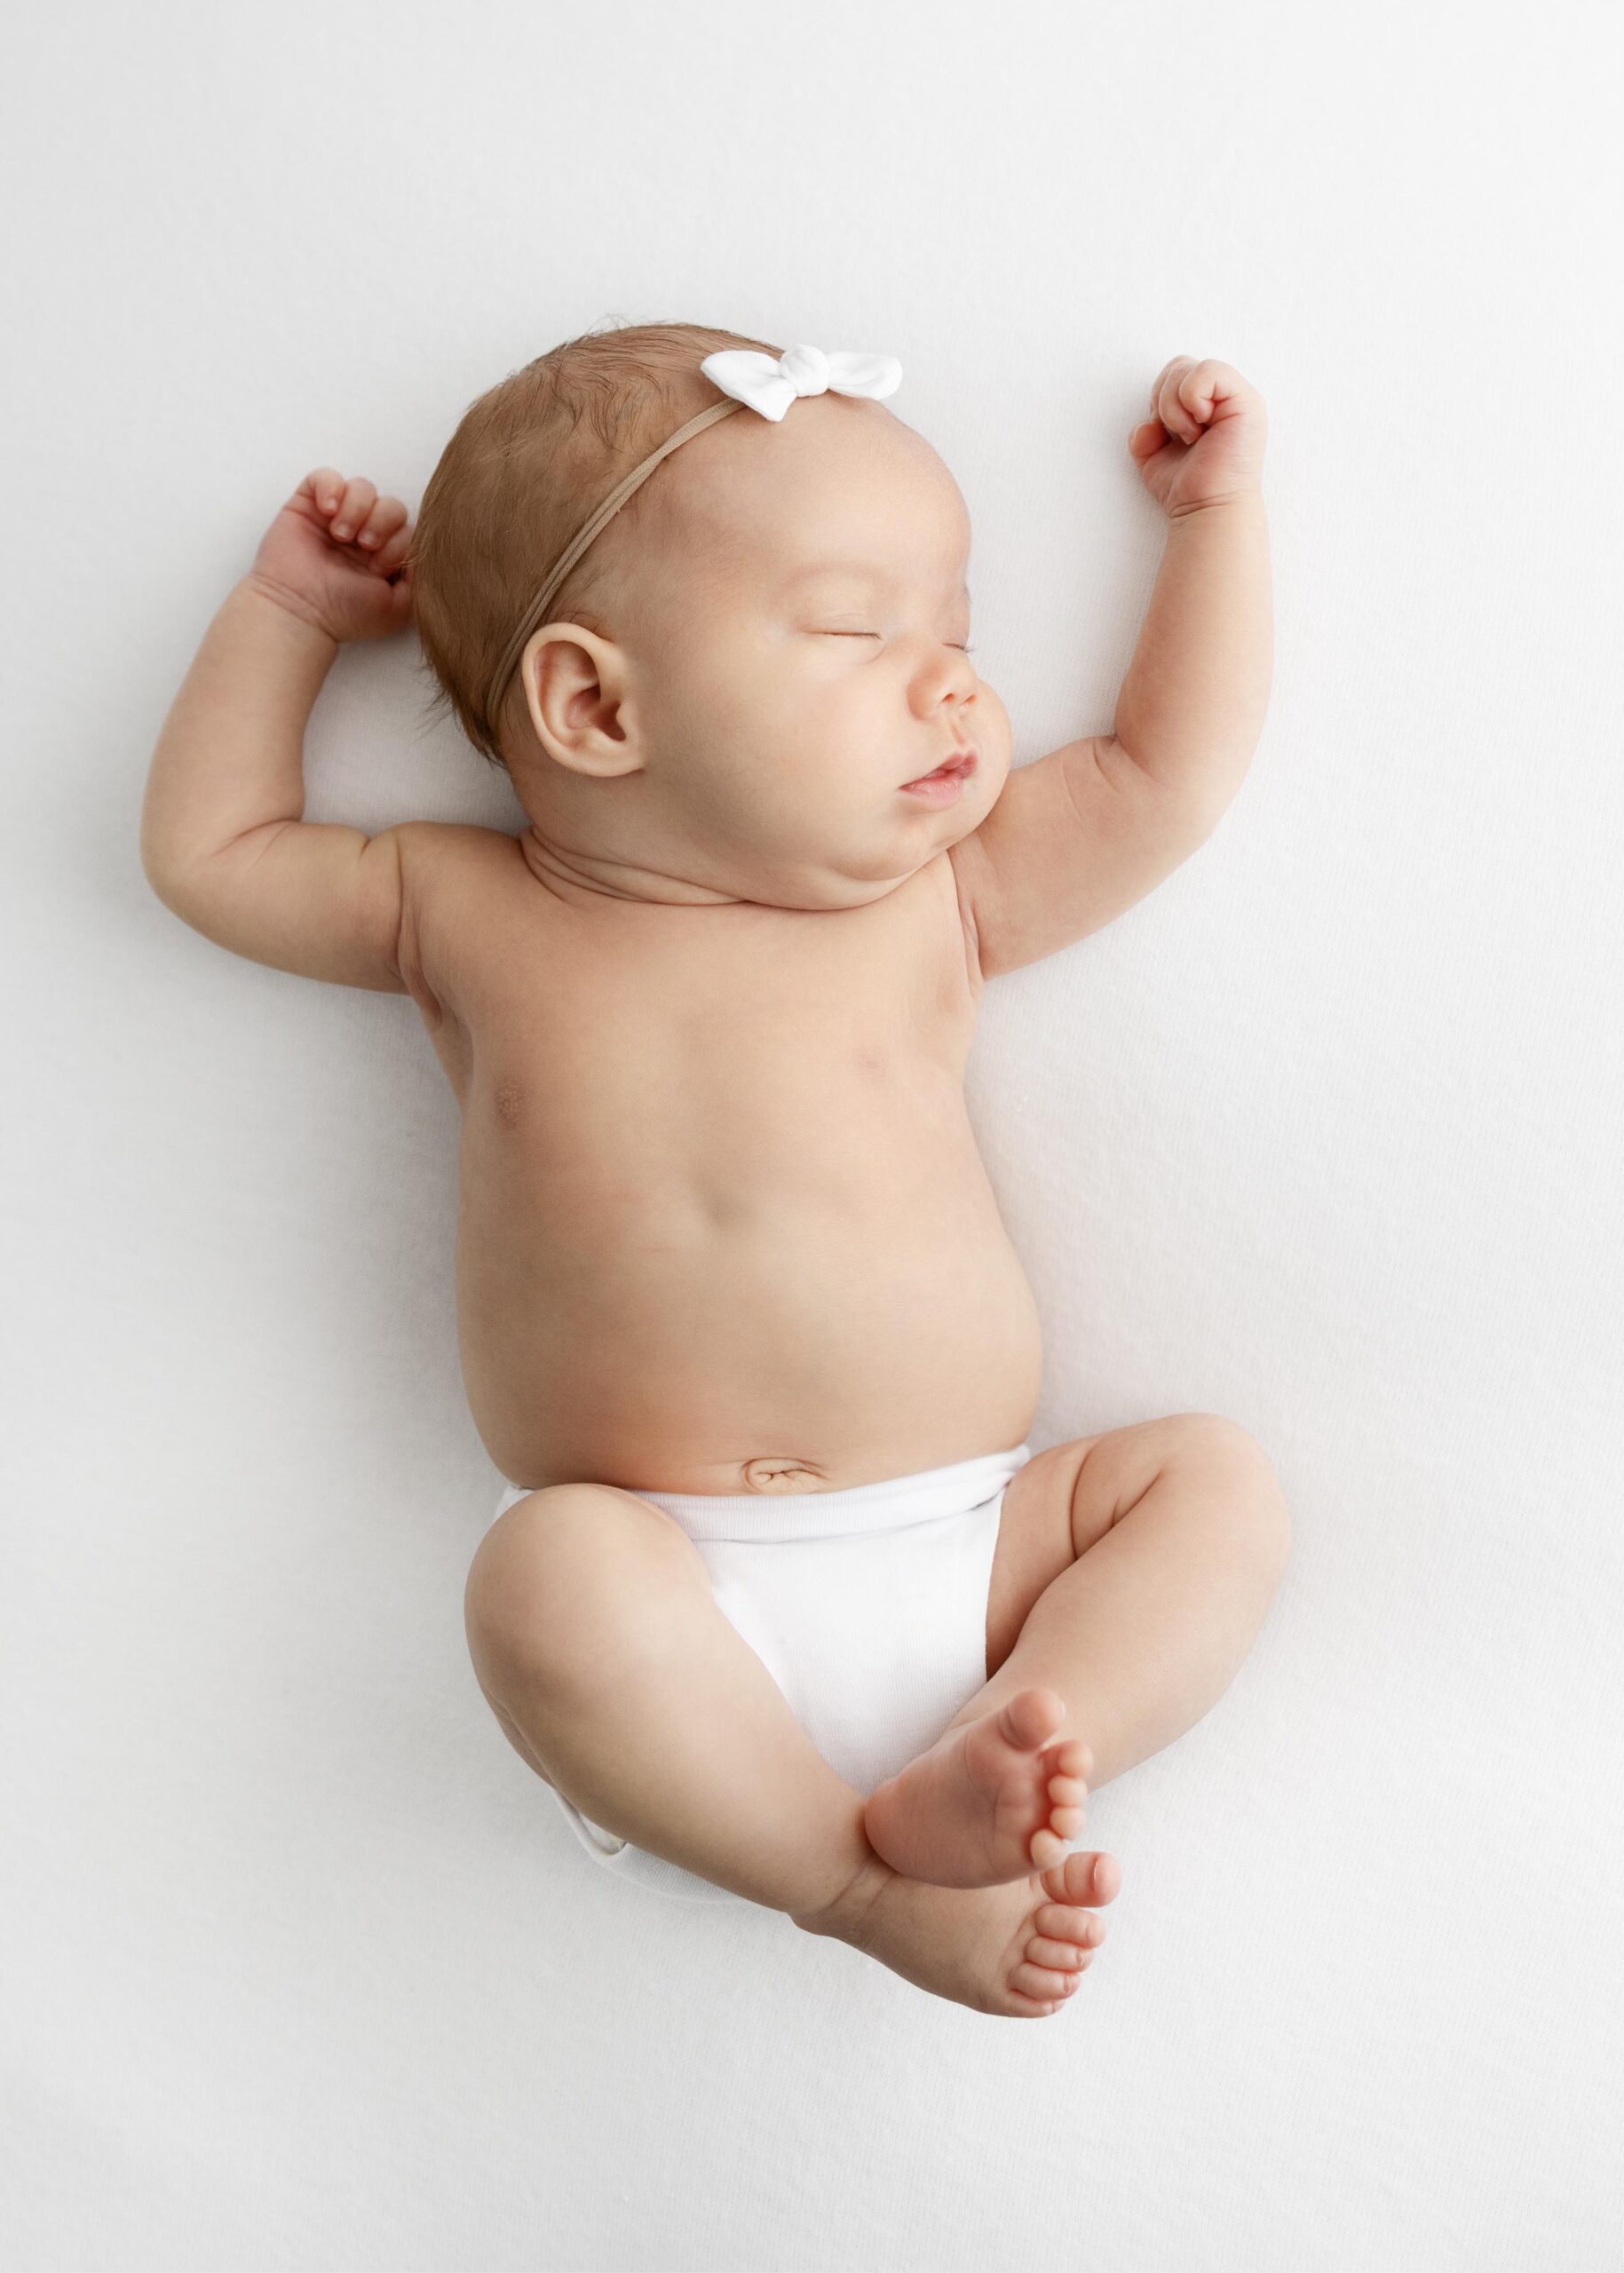 newborn girl sleeping with arms outstretched